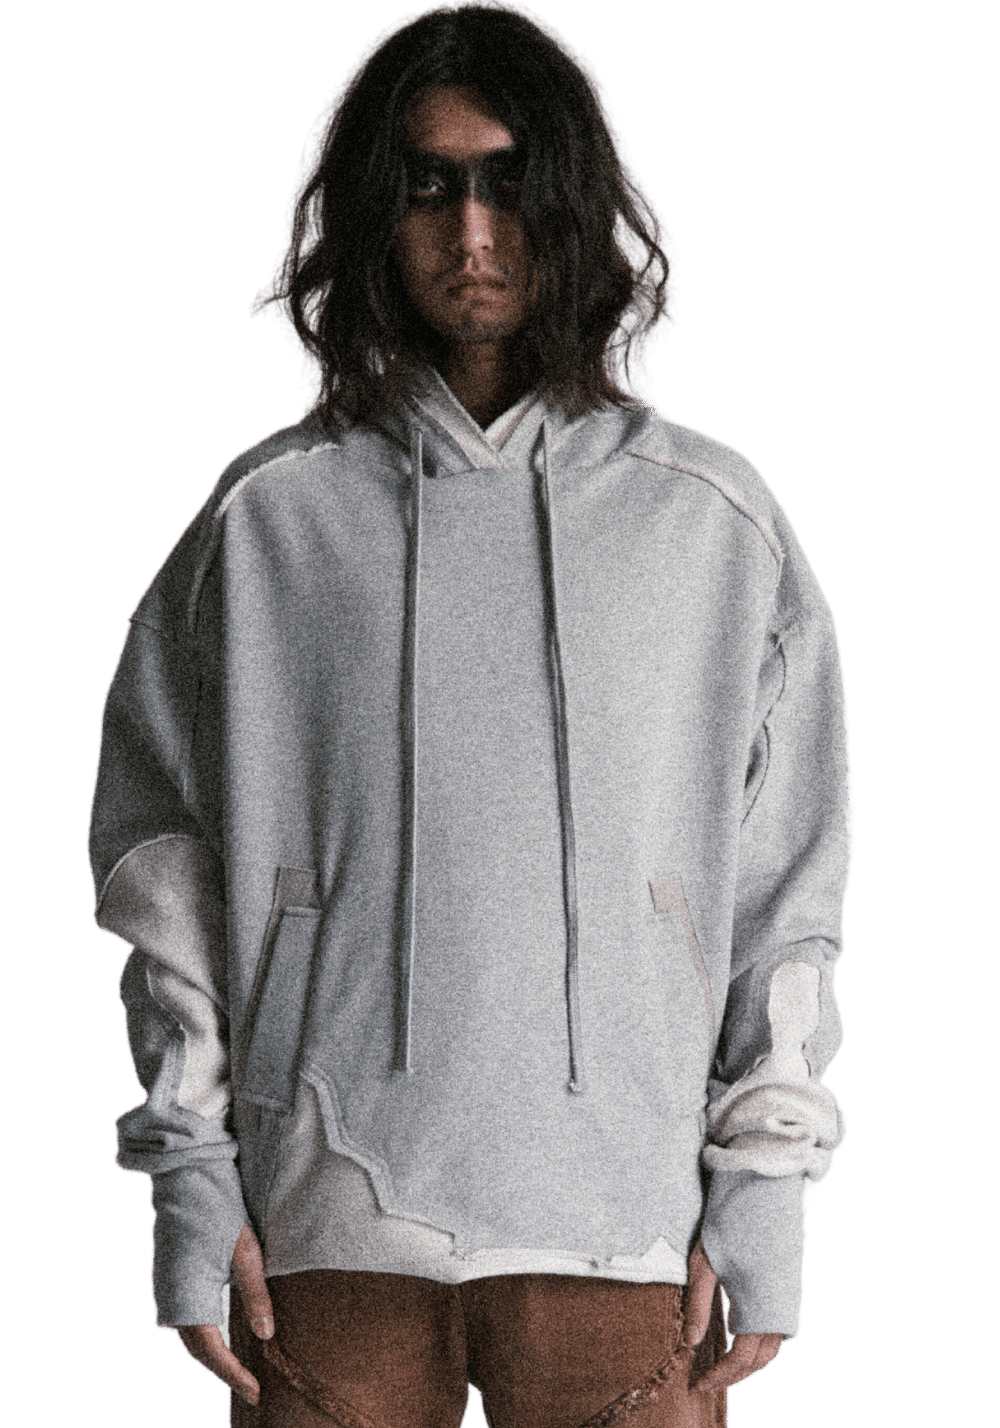 Ripped Patchwork Hoodie - PSYLOS 1, Ripped Patchwork Hoodie, Hoodie, D5ove, PSYLOS 1